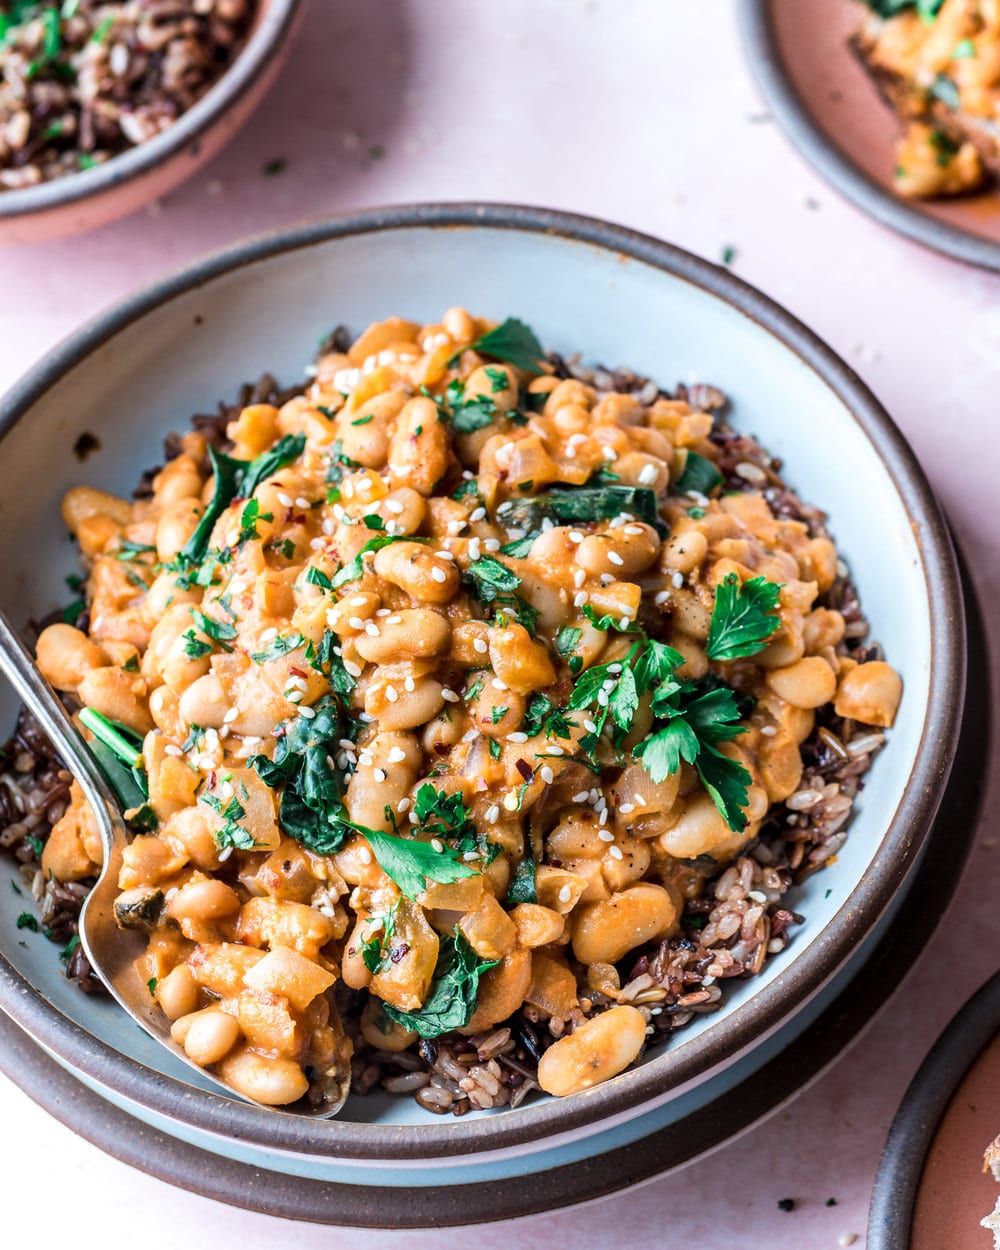 Creamy White Beans with Kale and Wild Rice